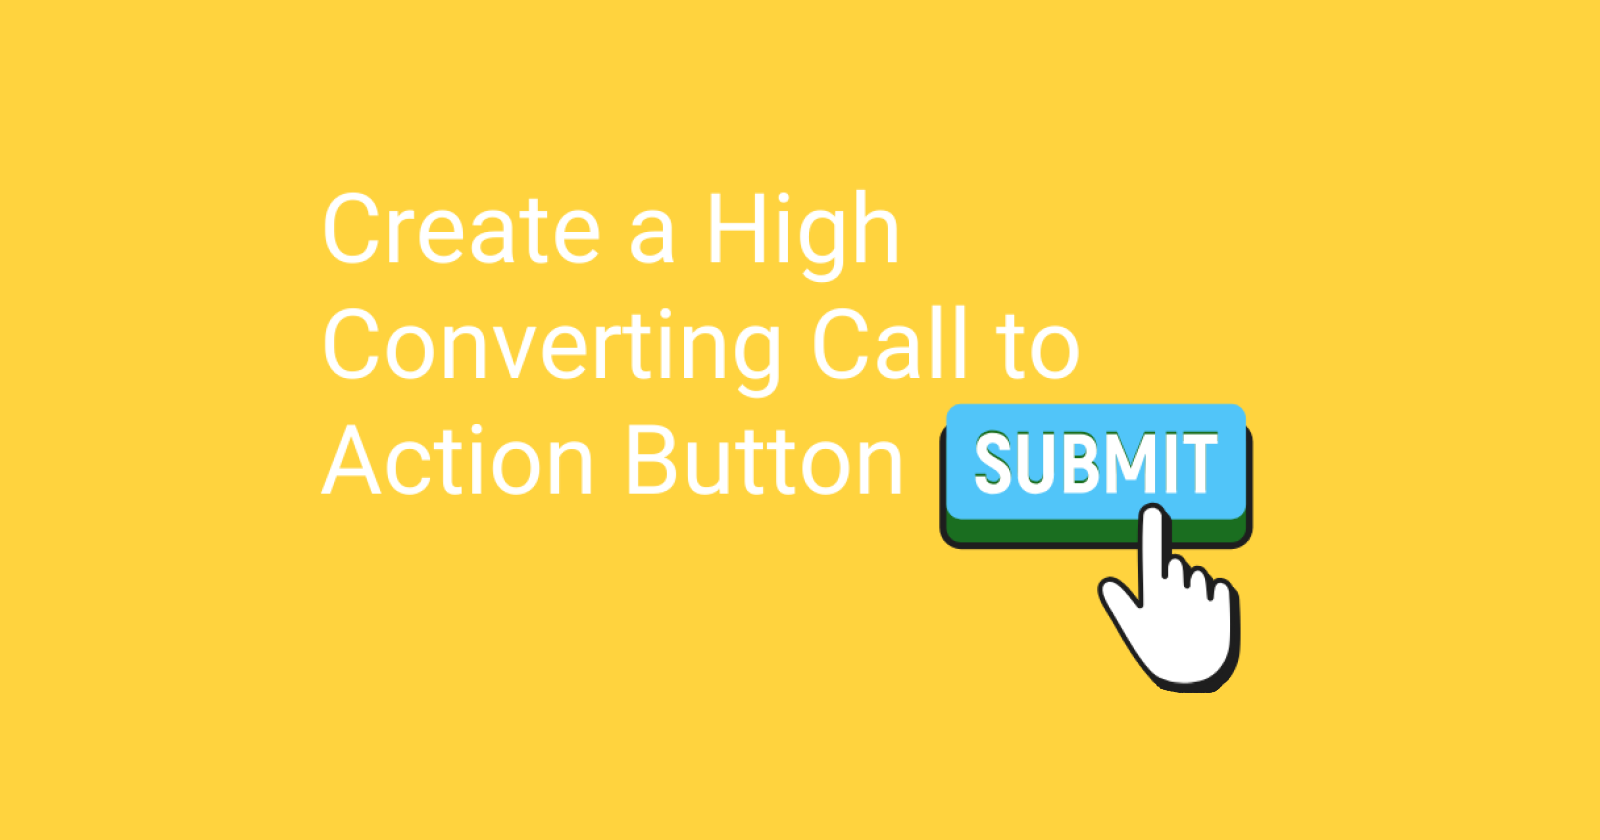 how-to-create-a-high-converting-call-to-action-button-5e67846015db8.png